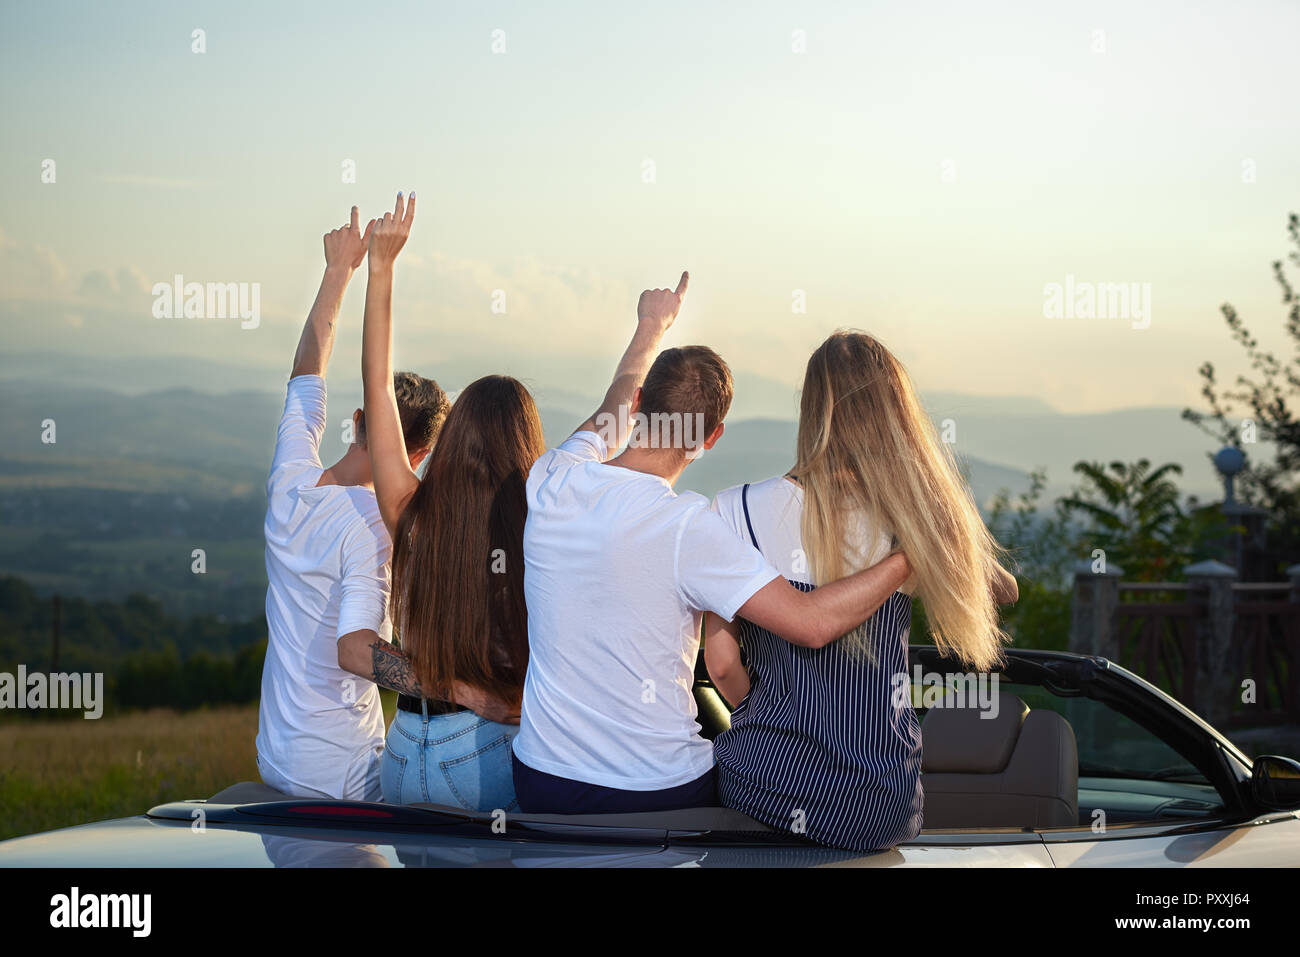 Two couples sitting on cabriolet and admiring landscapes and amazing view. Men putting arms round girls' waists and holding hands up. Friends enjoying summertime and journey by car. Stock Photo